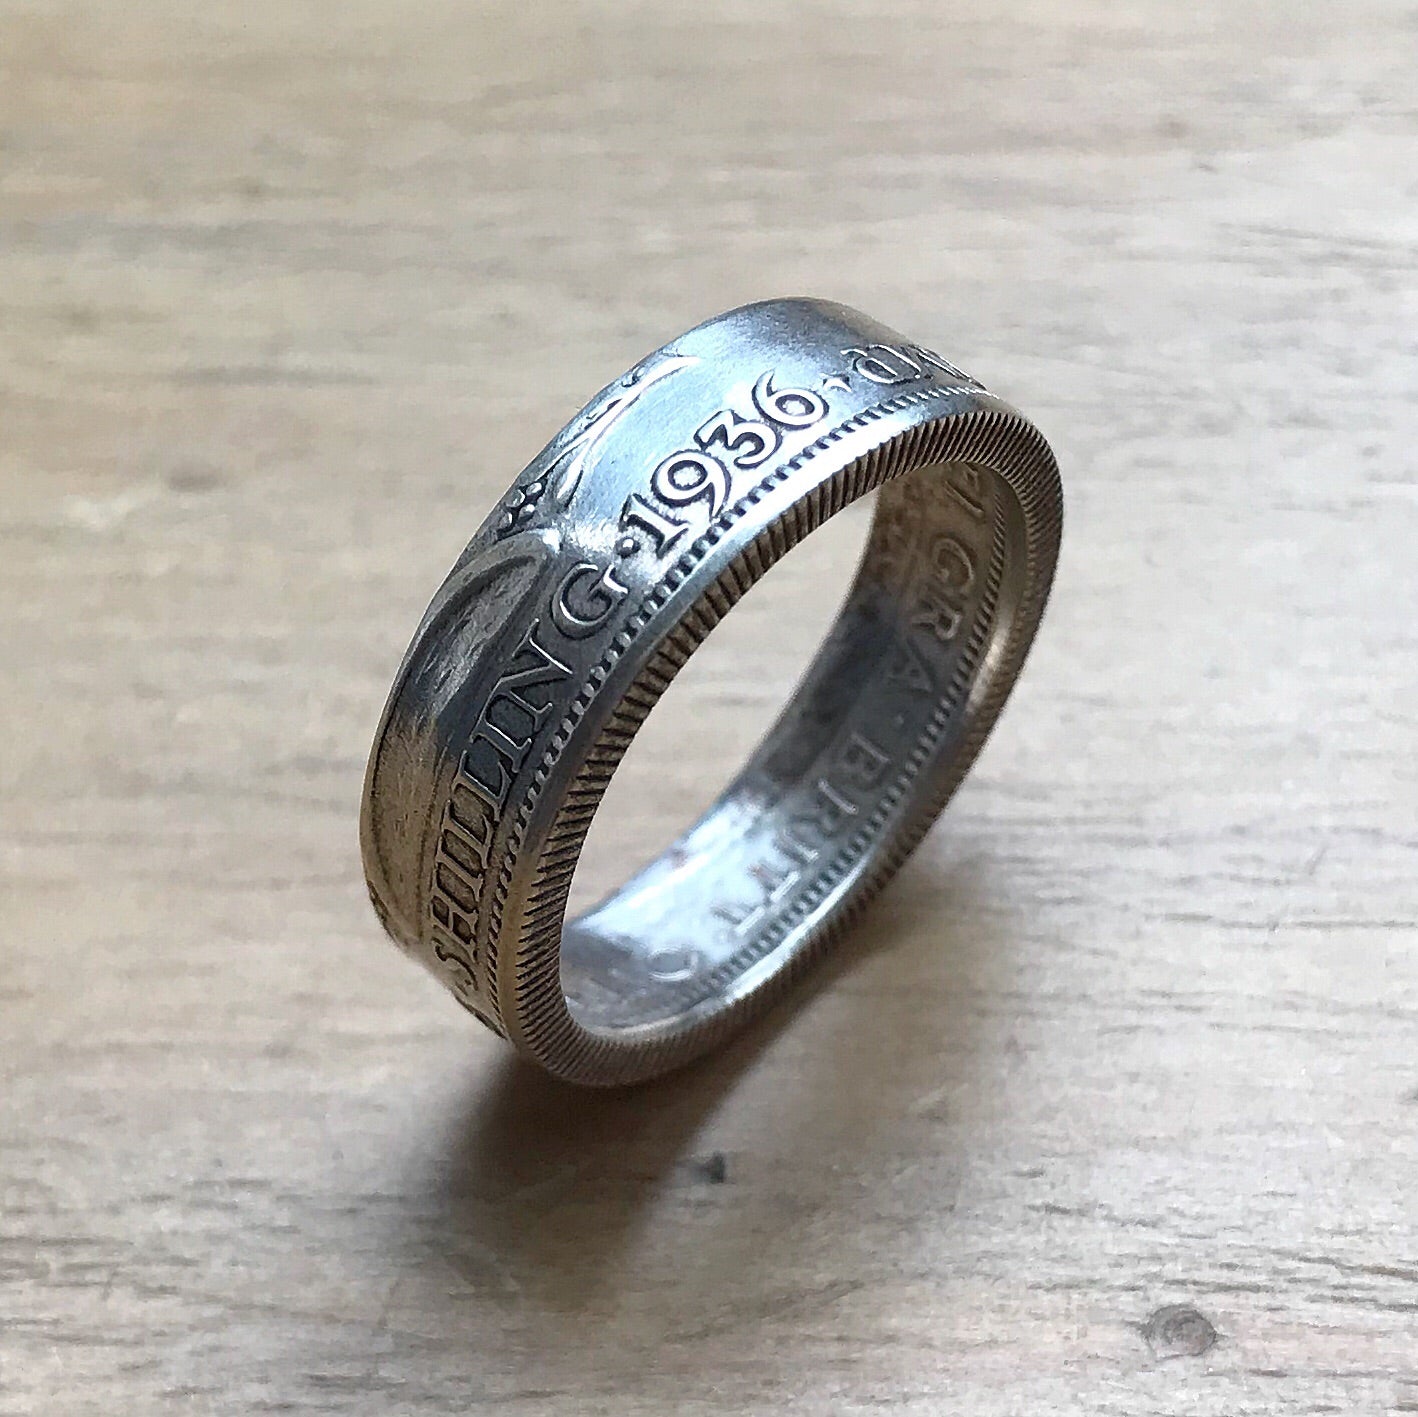 Silver One Shilling Coin Ring - Made to Order - 50% Silver - Shwen Design Uk